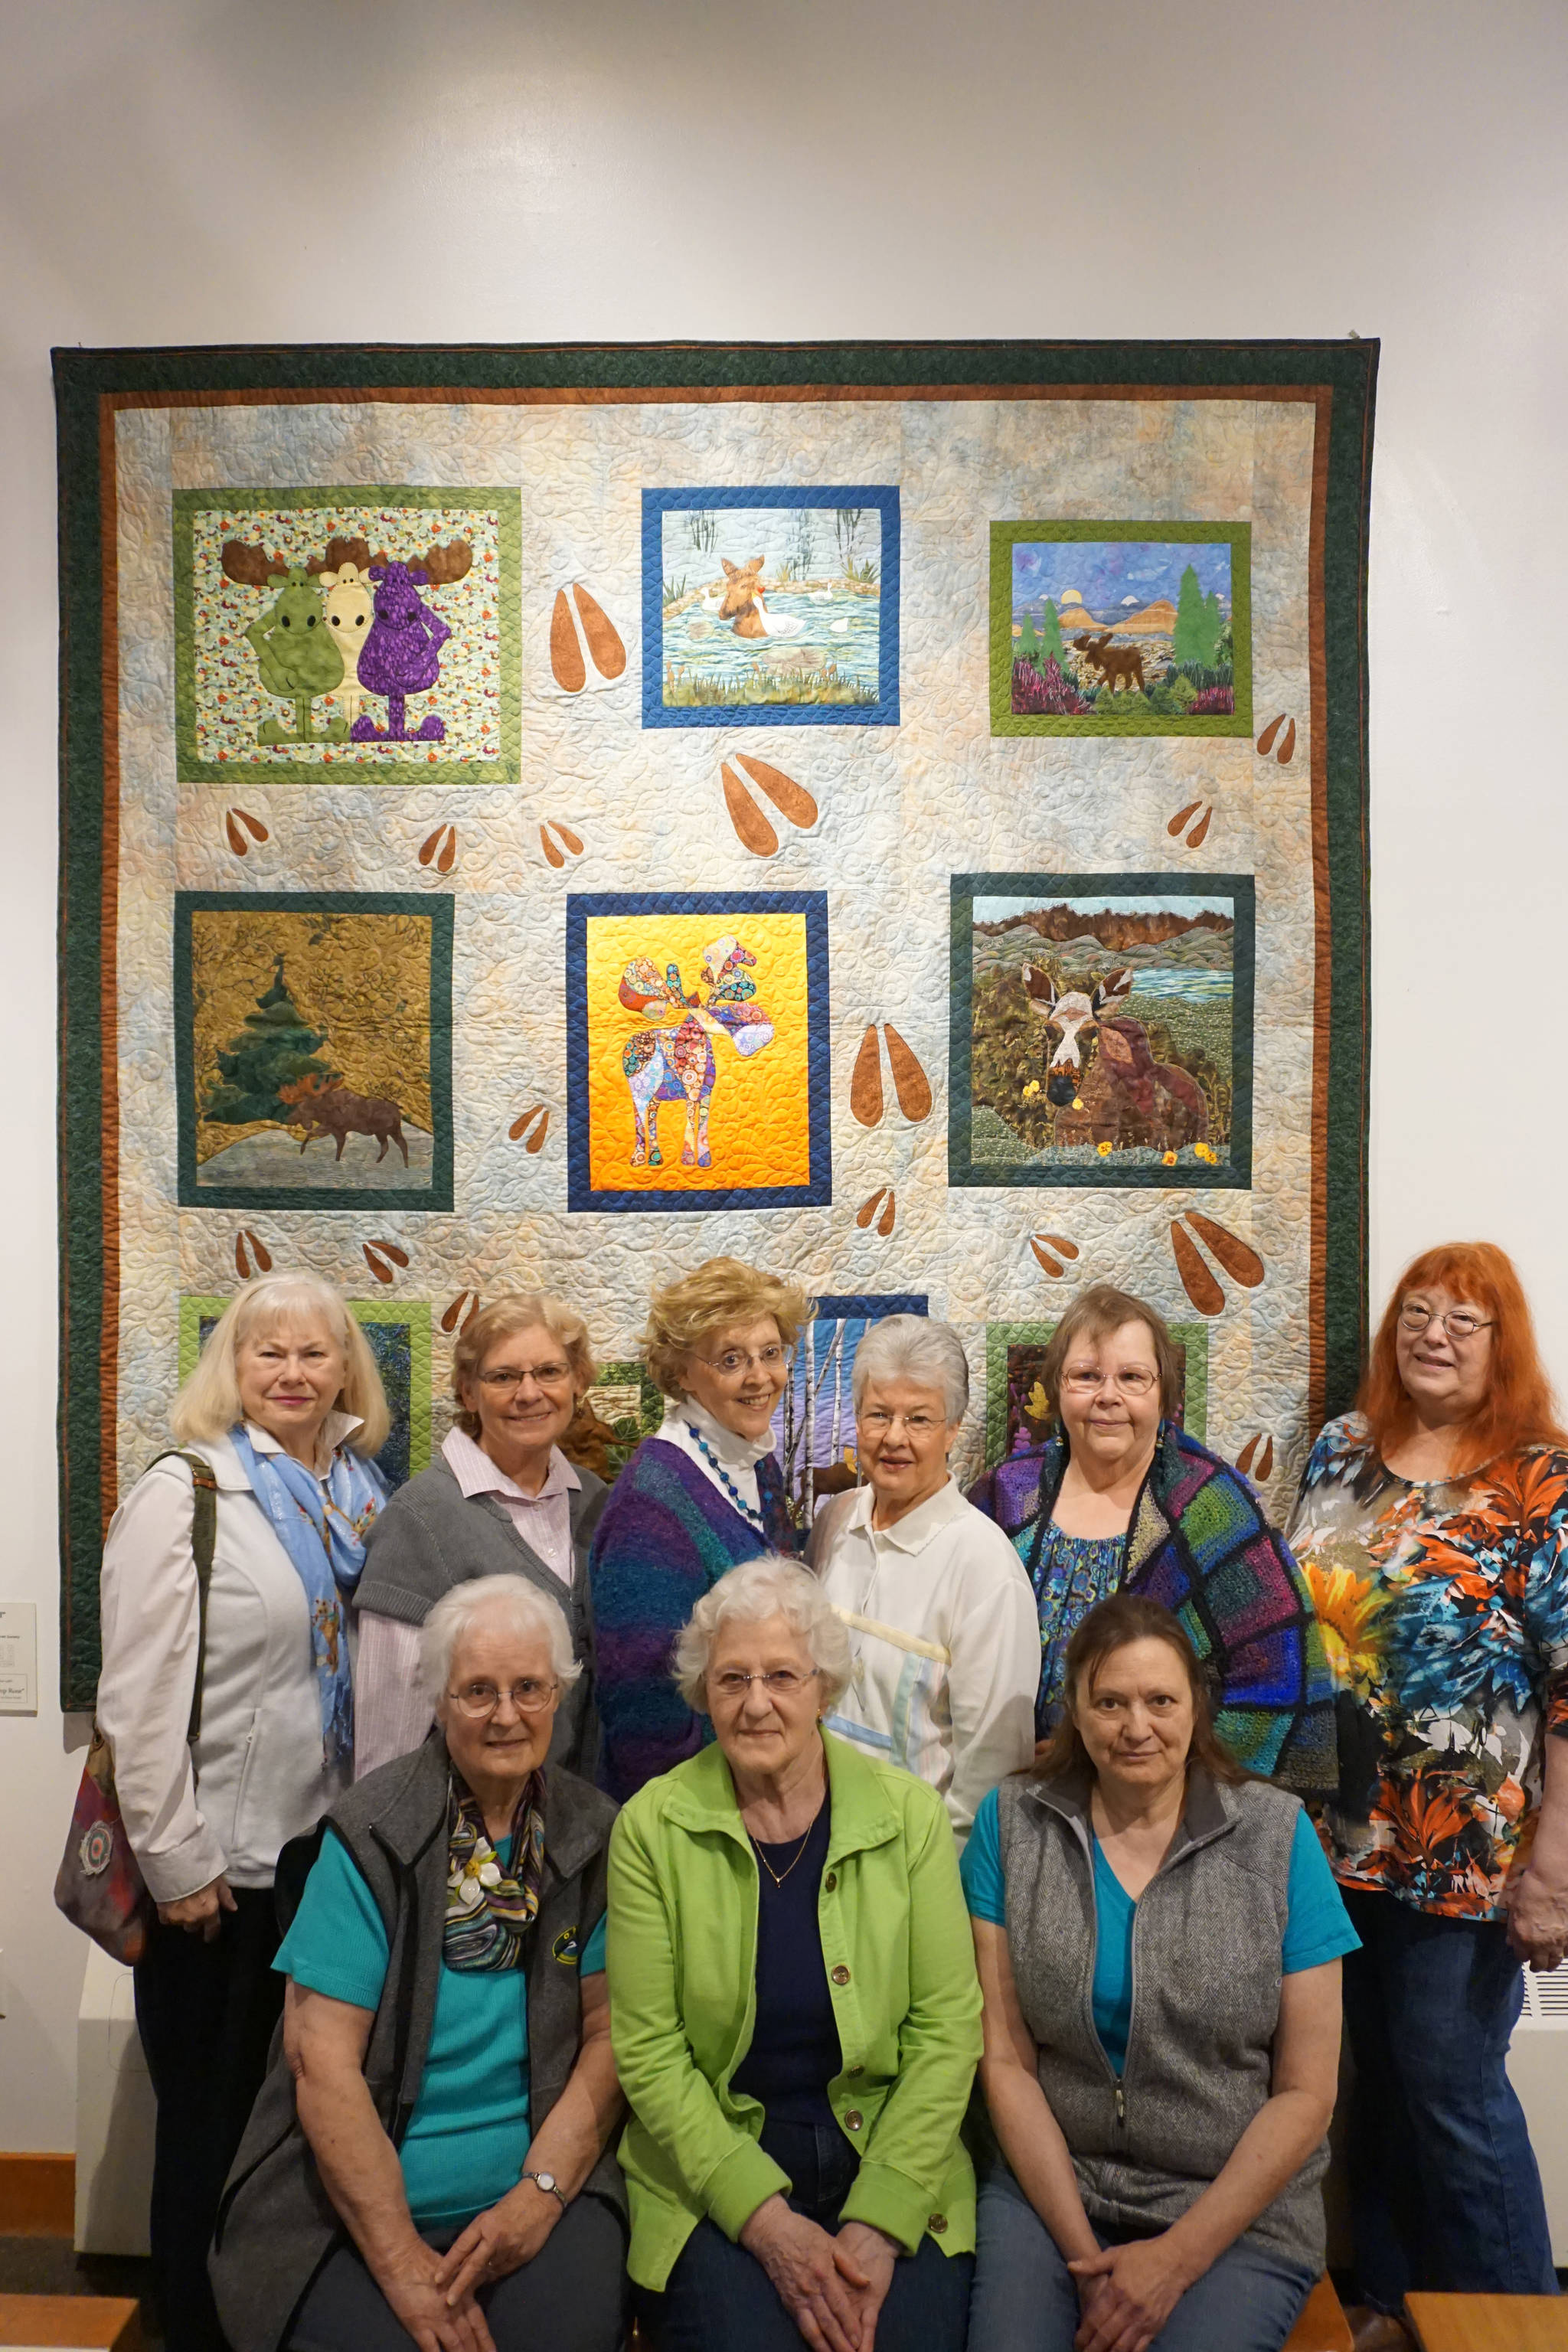 POPS, the Patrons of the Pratt, unveiled its 2017 fundraiser quilt, “Moosin’ Around,” at a luncheon on Monday. Posing with the quilt they helped make are, from left to right, top, Sherry Broome, Janet Bacher, Ruby Nofziger, Kathy Pankratz, Linda Wagner and Shirley Svoboda; from left to right, front, Eileen Wythe, Glenda Rosenbalm and Karrie Youngblood. Wythe also did this year’s bonus quilt, “Swamp Rose.”